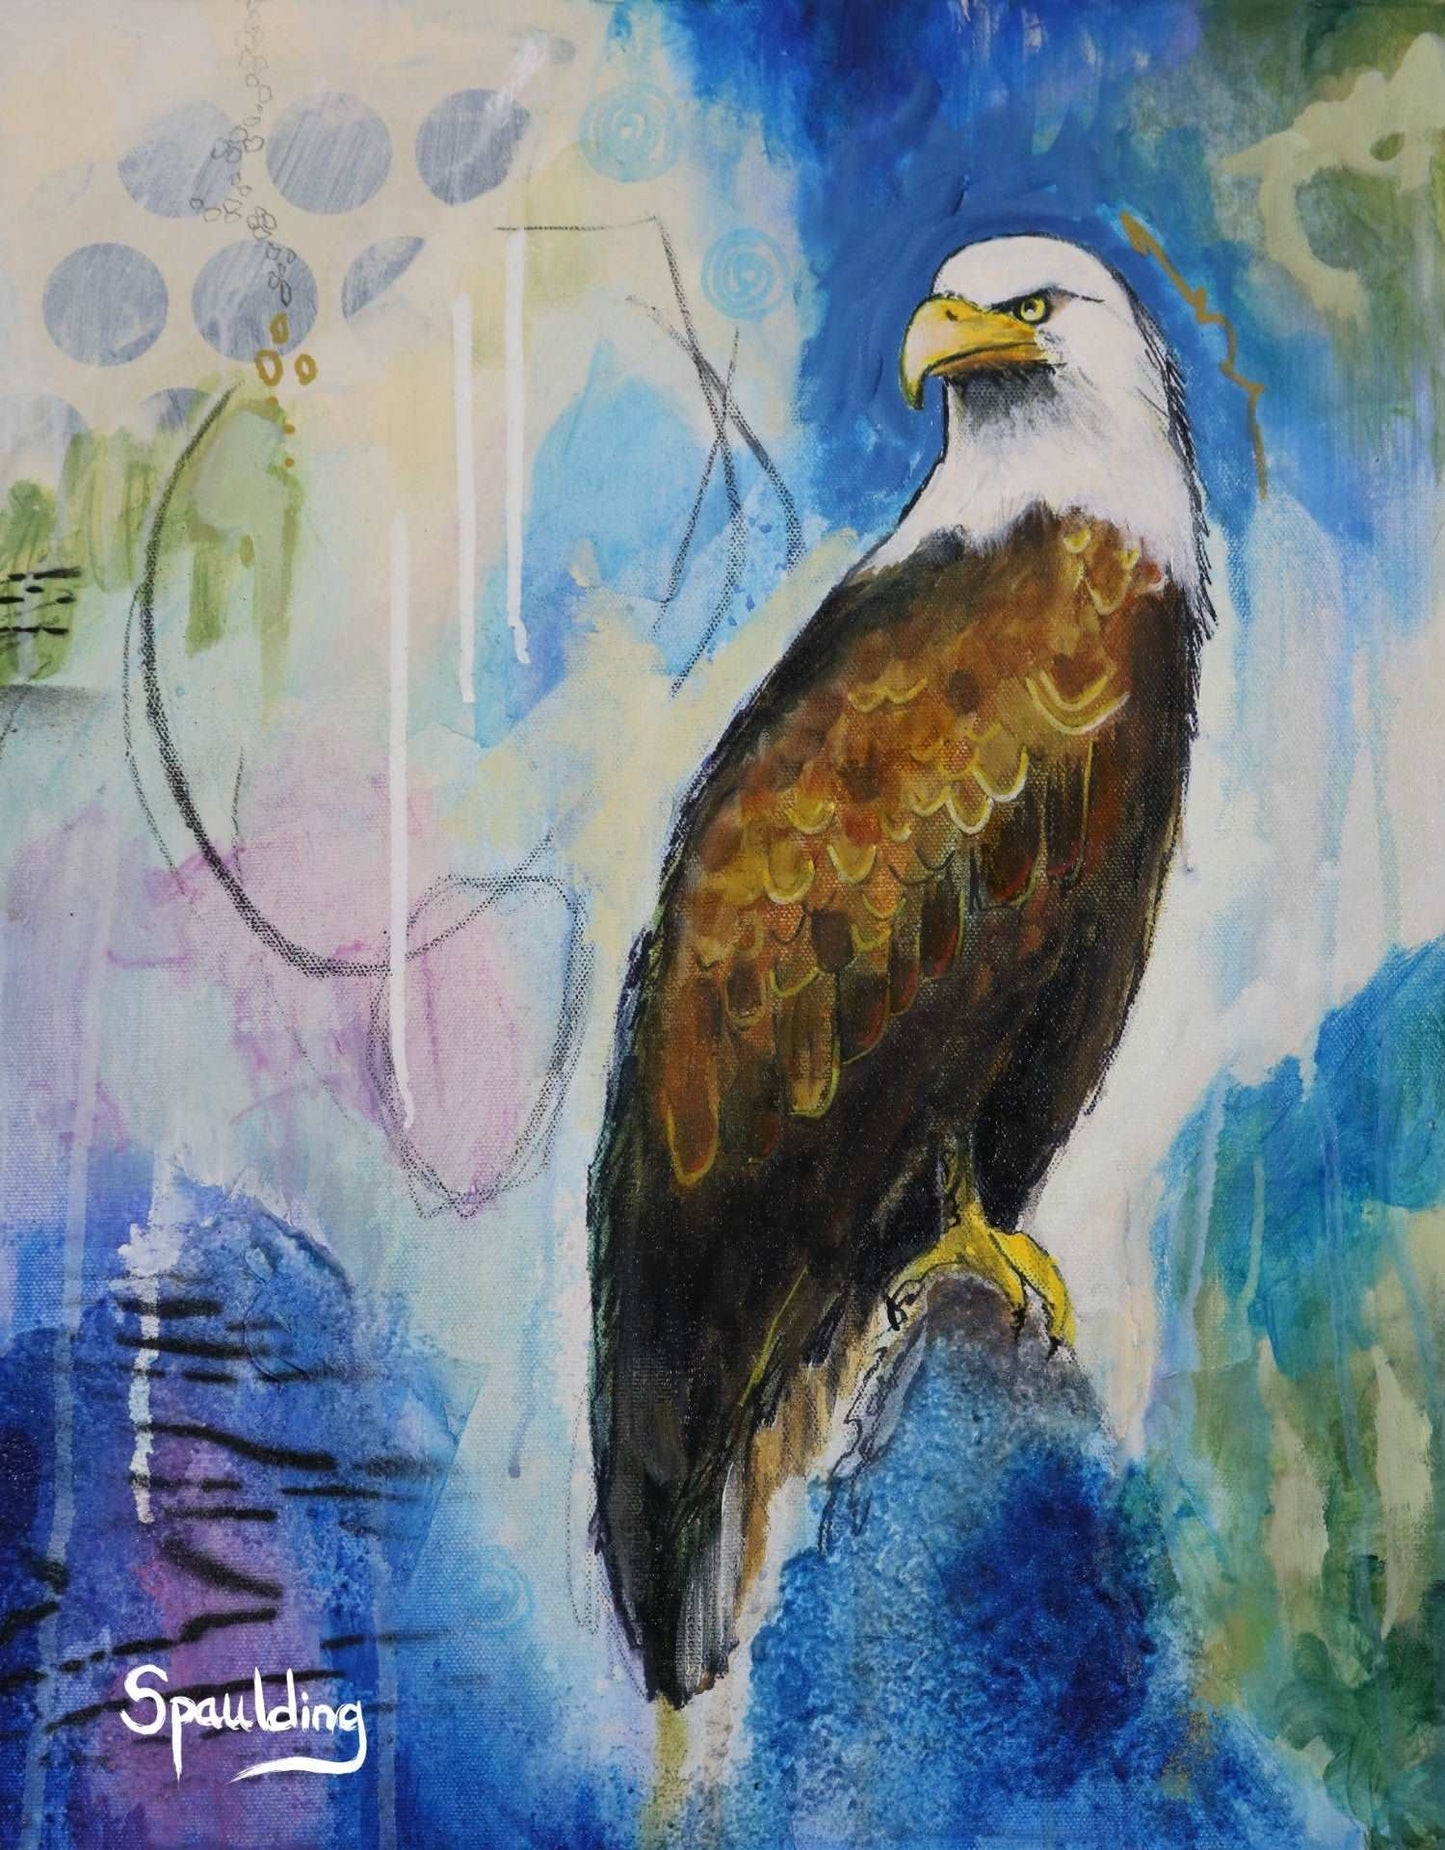 Solitude Is Found eagle portrait on canvas blue cream and green abstract background